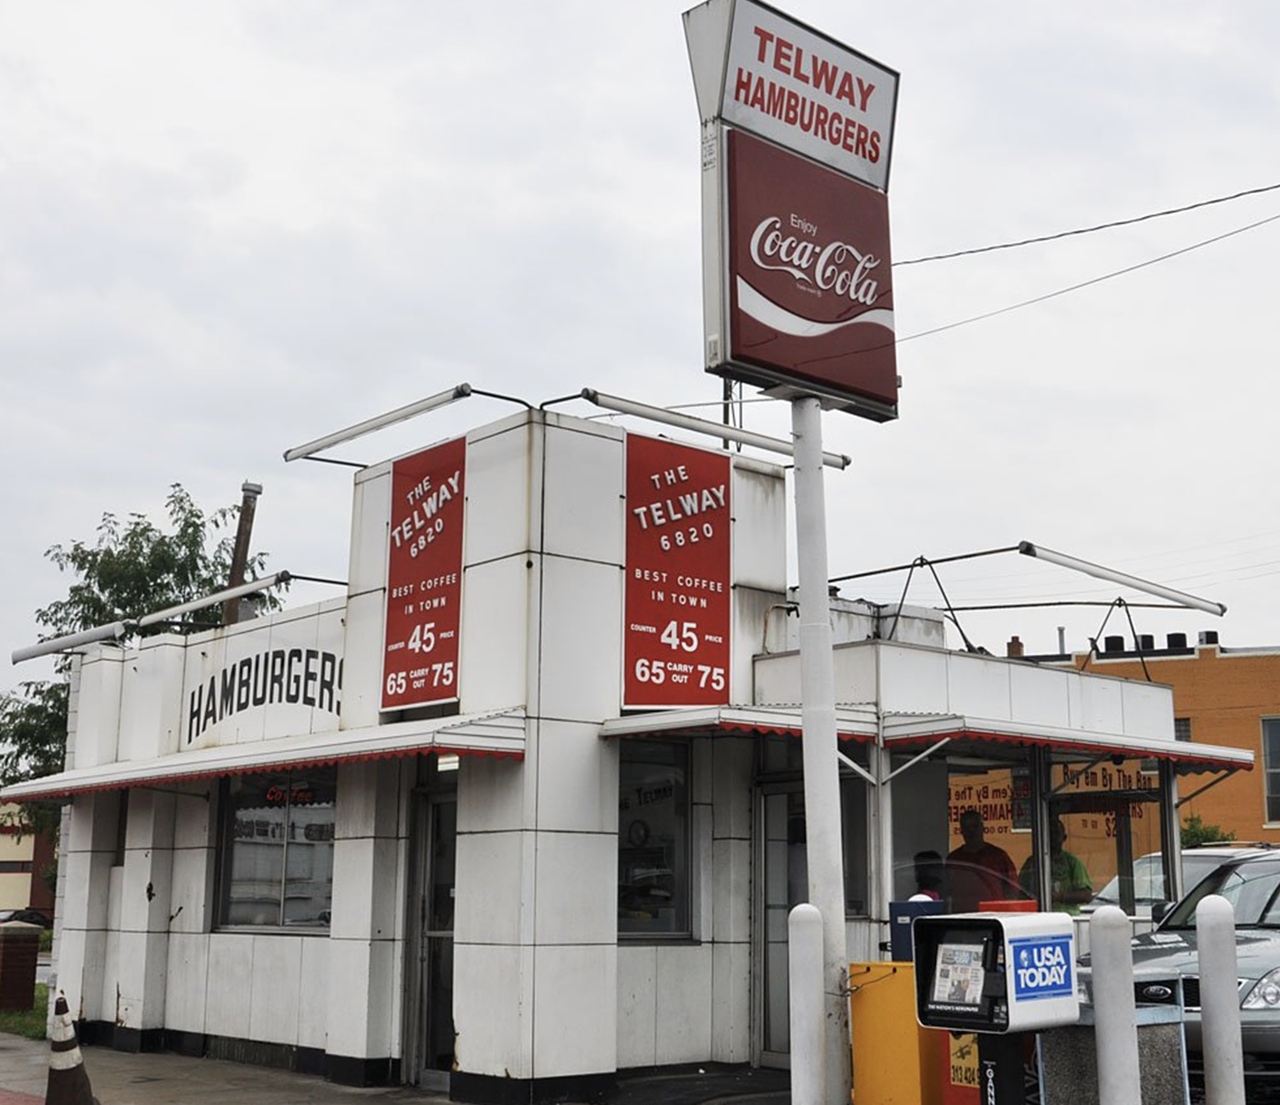 Telway Hamburgers
6820 Michigan Ave., Detroit; 313-843-2146 | 27000 John R Rd., Madison Heights; 248-545-7962 | thetelway.4-food.com
This Southwest Detroit old-timey spot, with a twin location in Madison Heights, offers burgers, sliders, and hot dogs 24 hours a day. It’s worth a visit for the nostalgic vibes alone. 